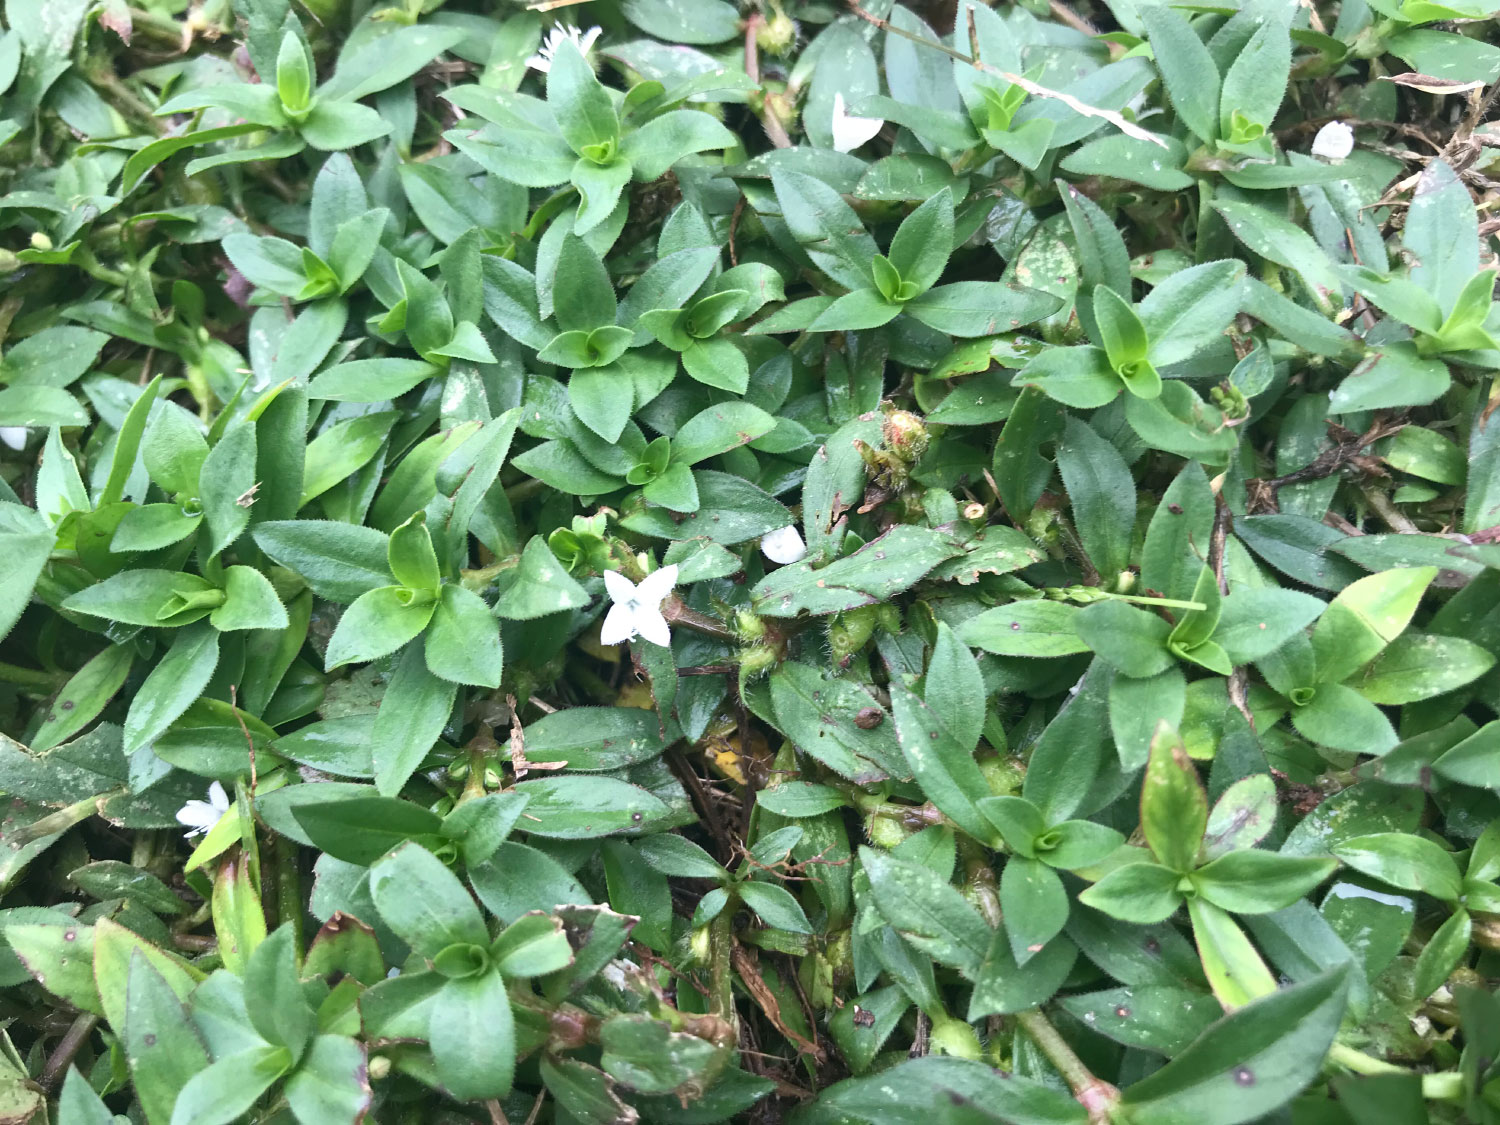 Virginia Buttonweed: The Small White Flowers in Your Lawn